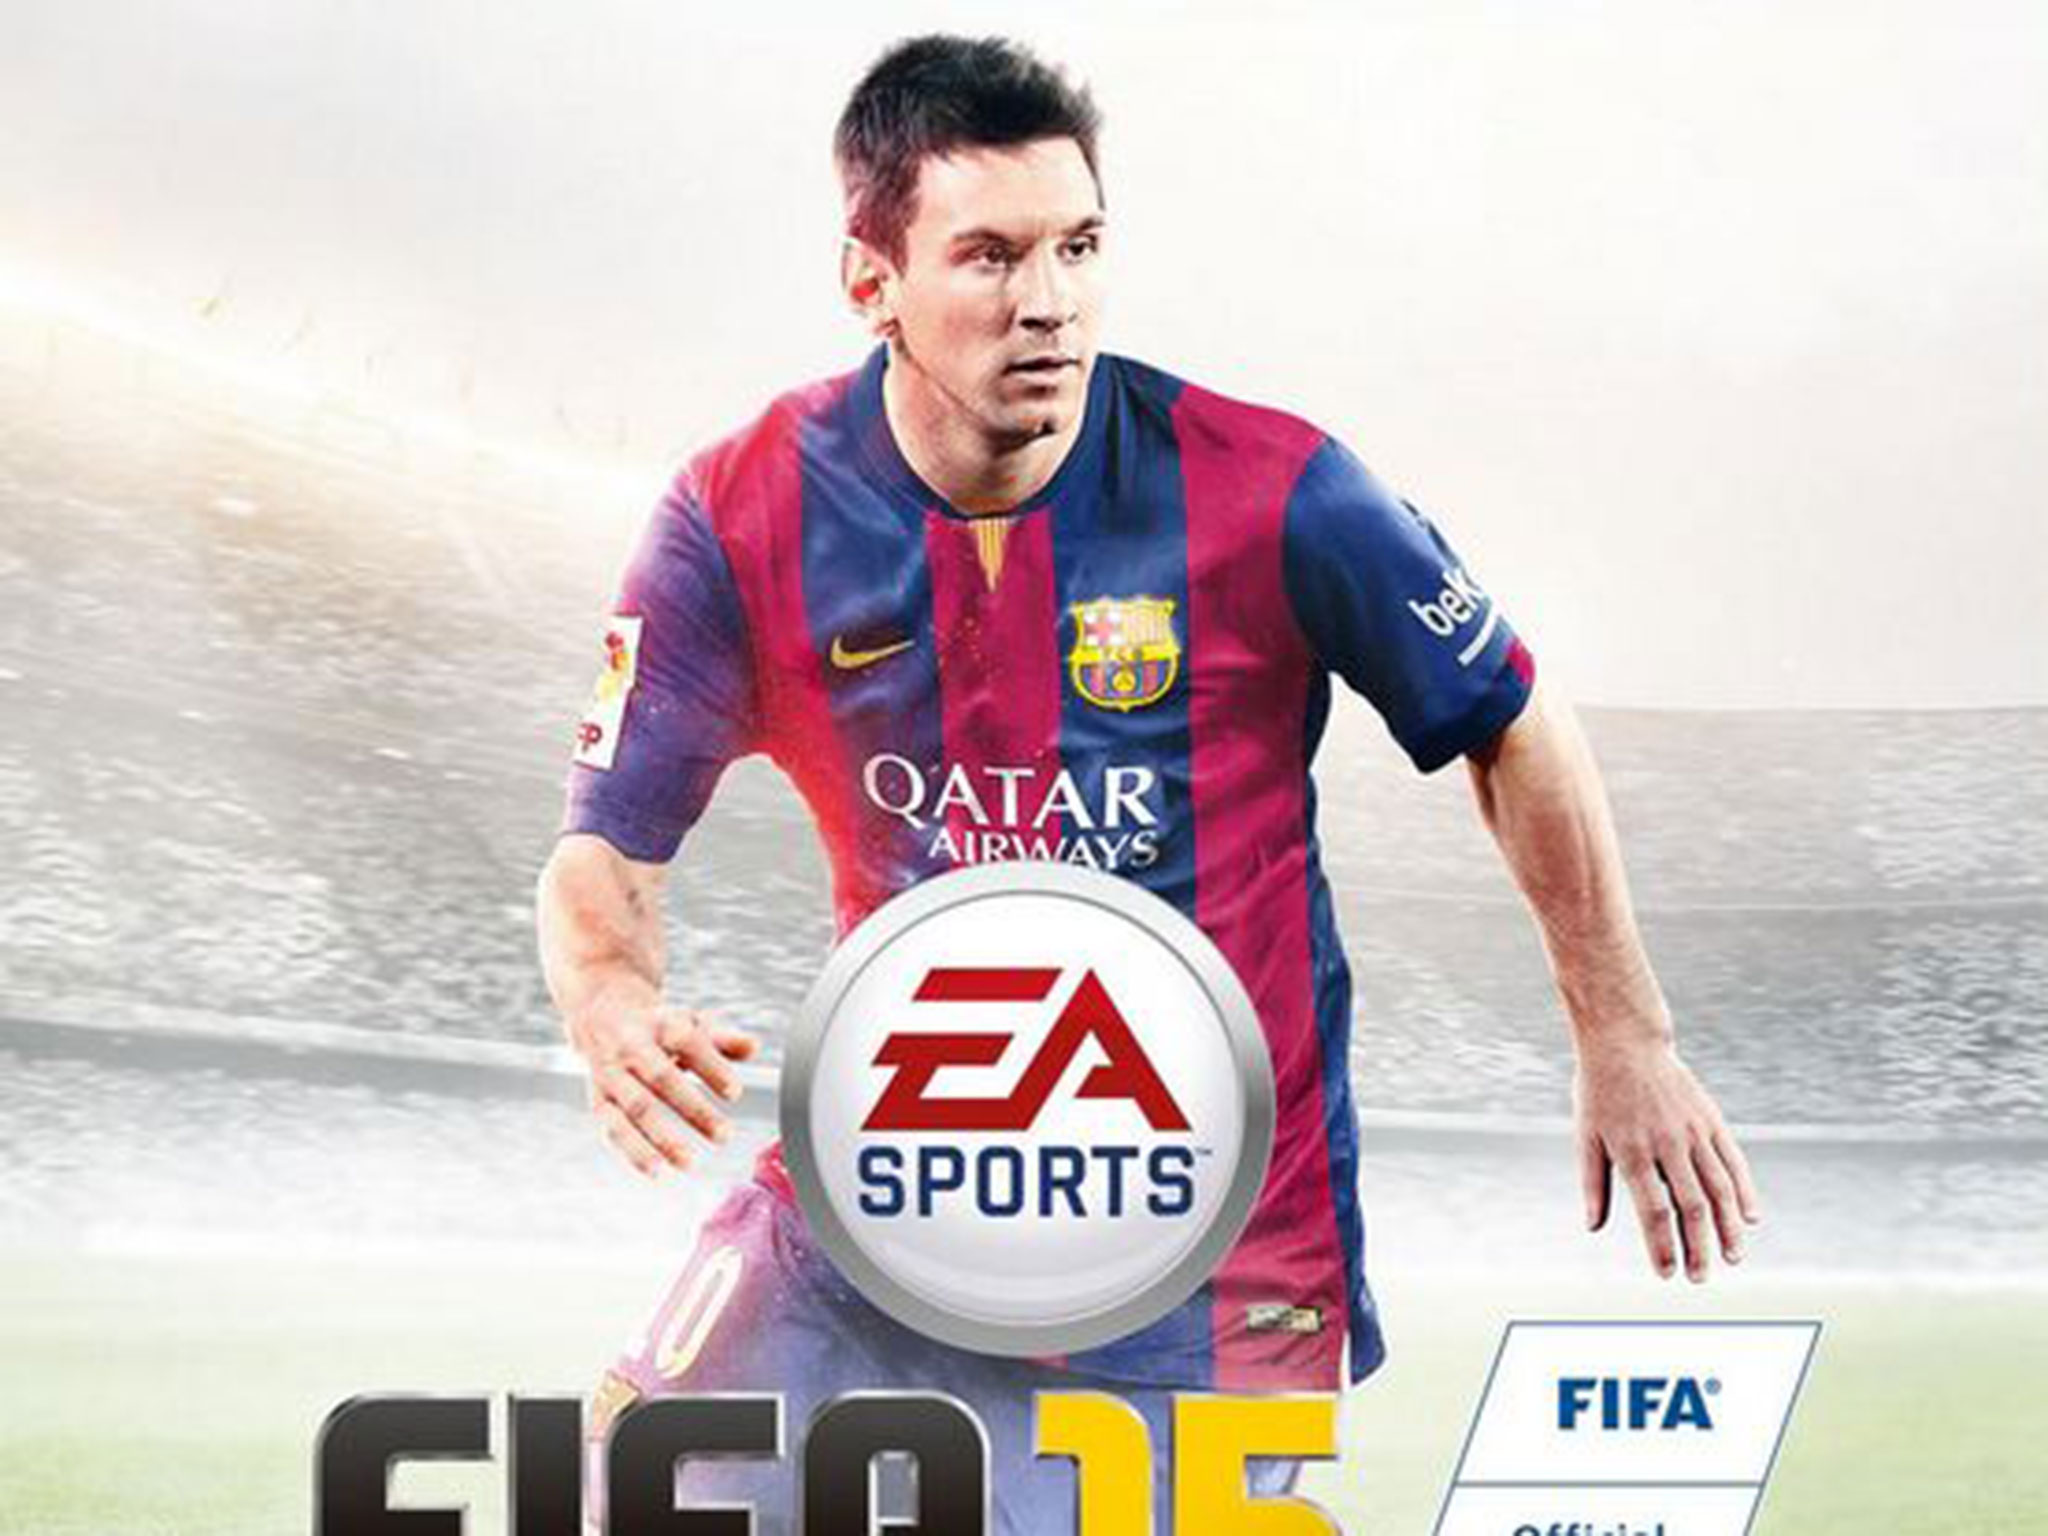 Messi And Fifa Poster Games Wallpaper Image High